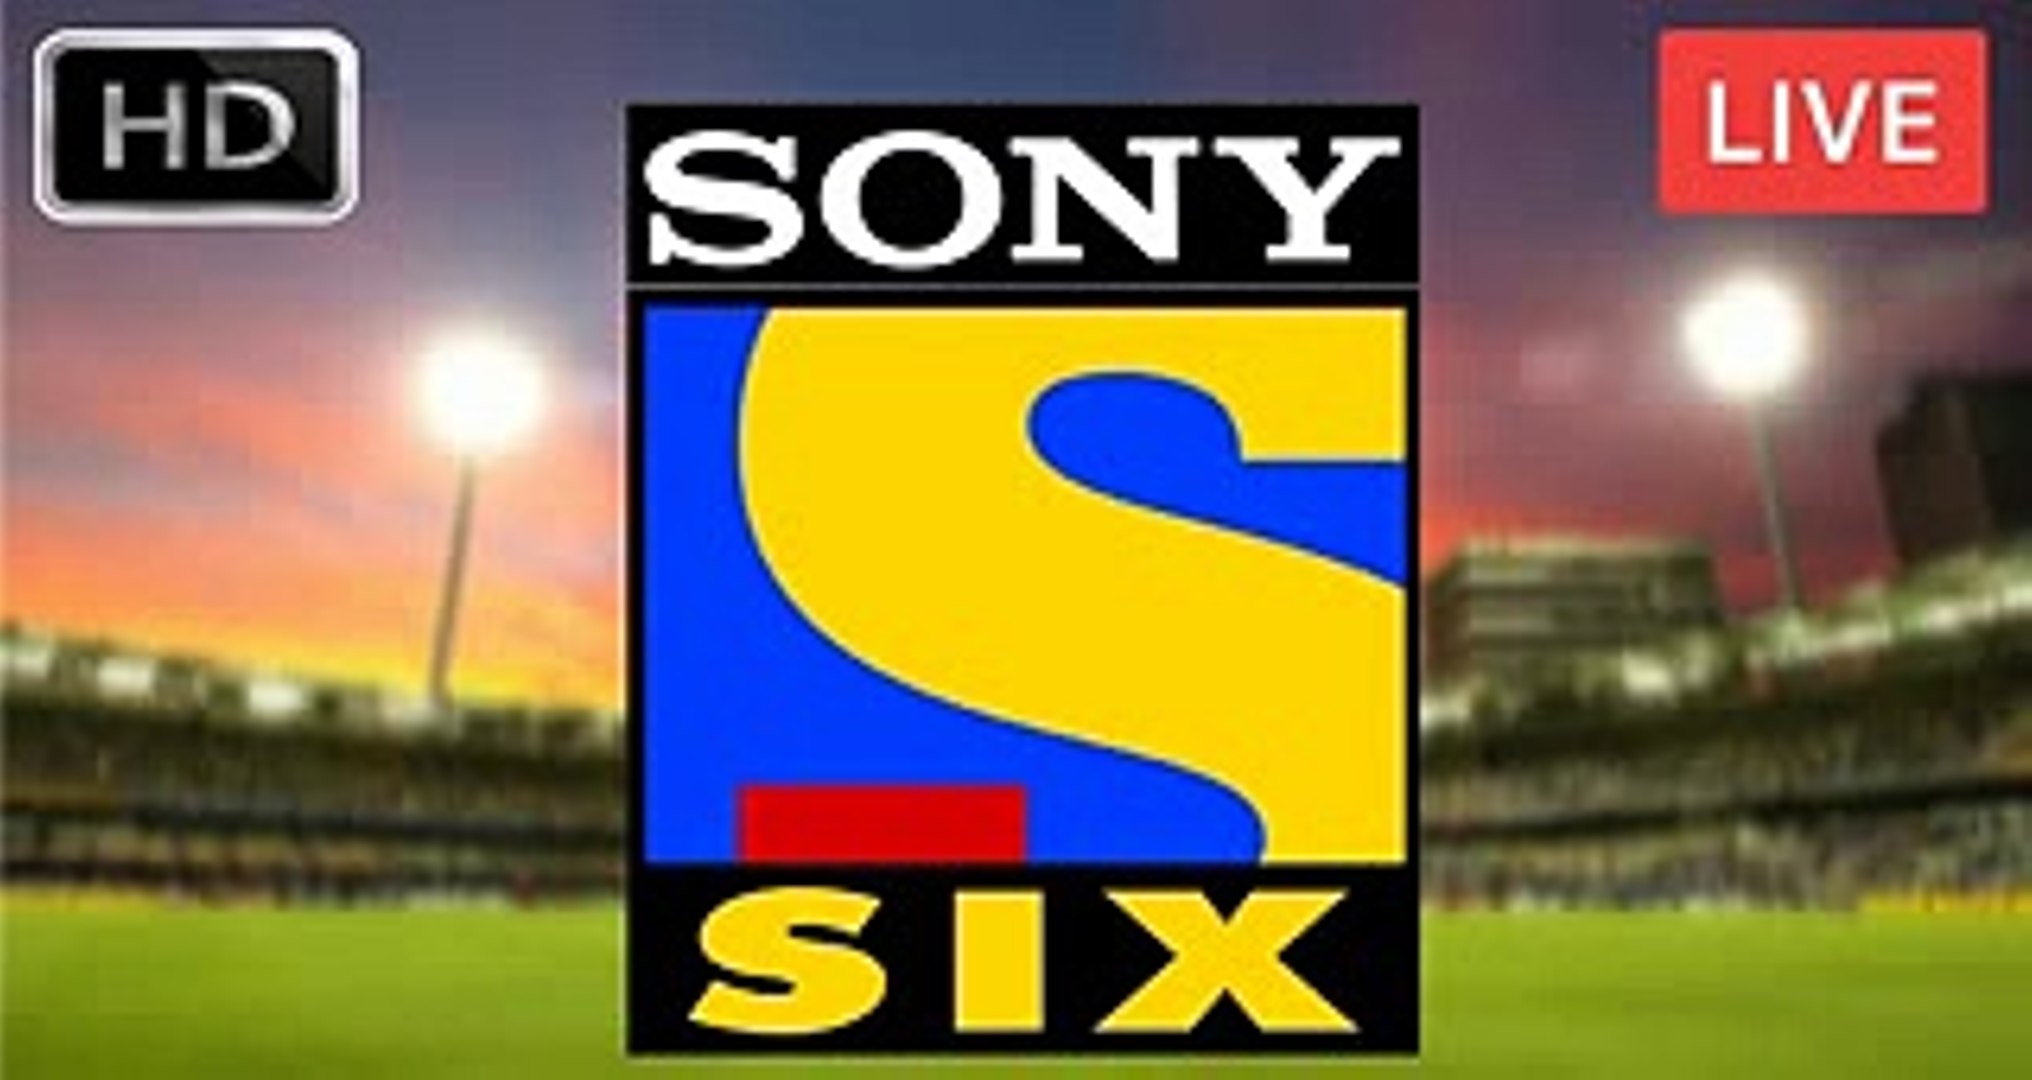 Sony Ten 3 live cricket streaming India vs Australia 1st Test with highlights2032 x 1080